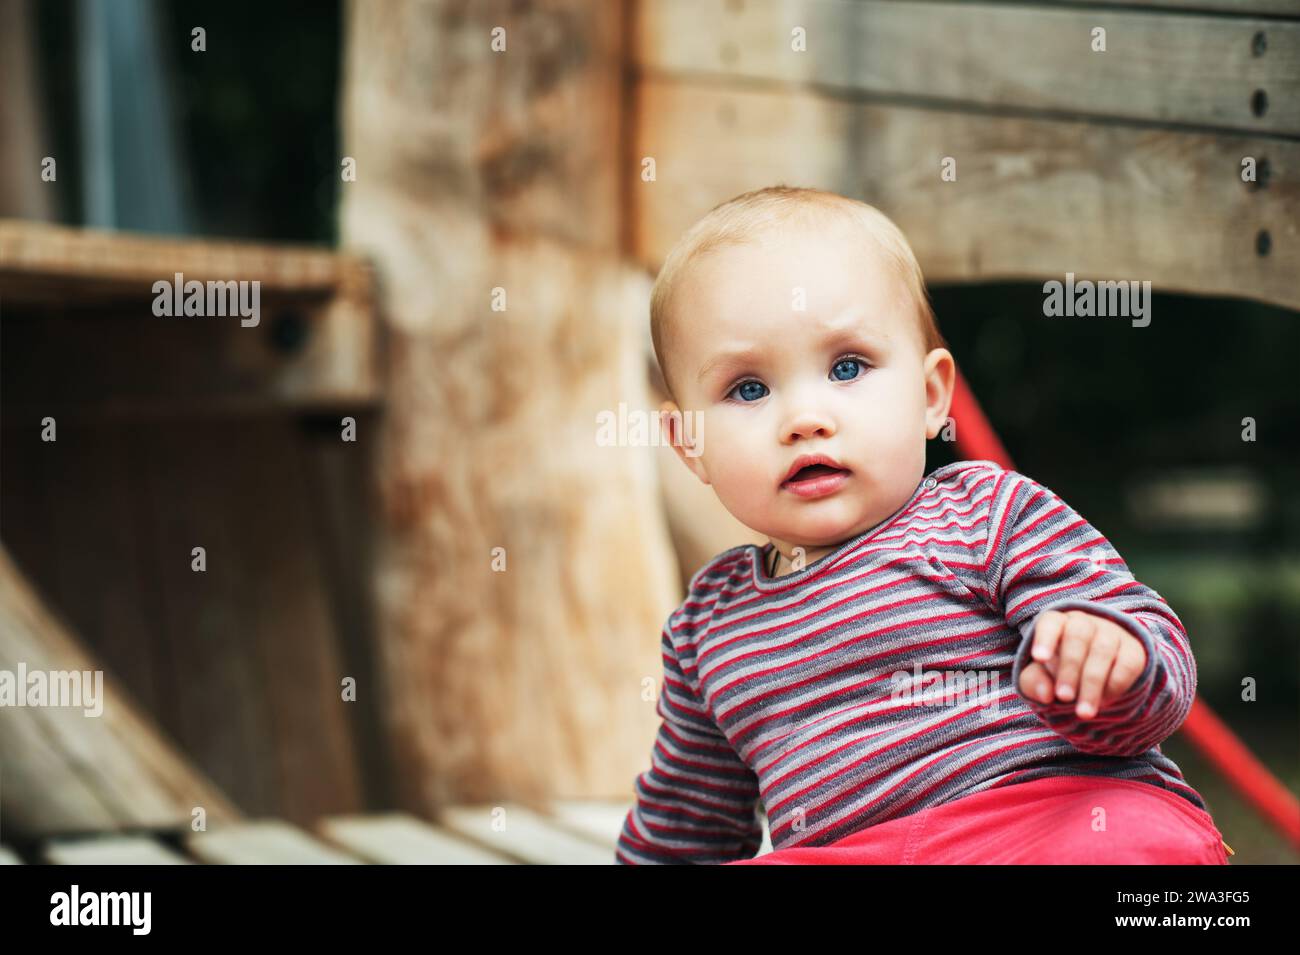 Outdoor portrait of adorable baby girl having fun on playground Stock Photo